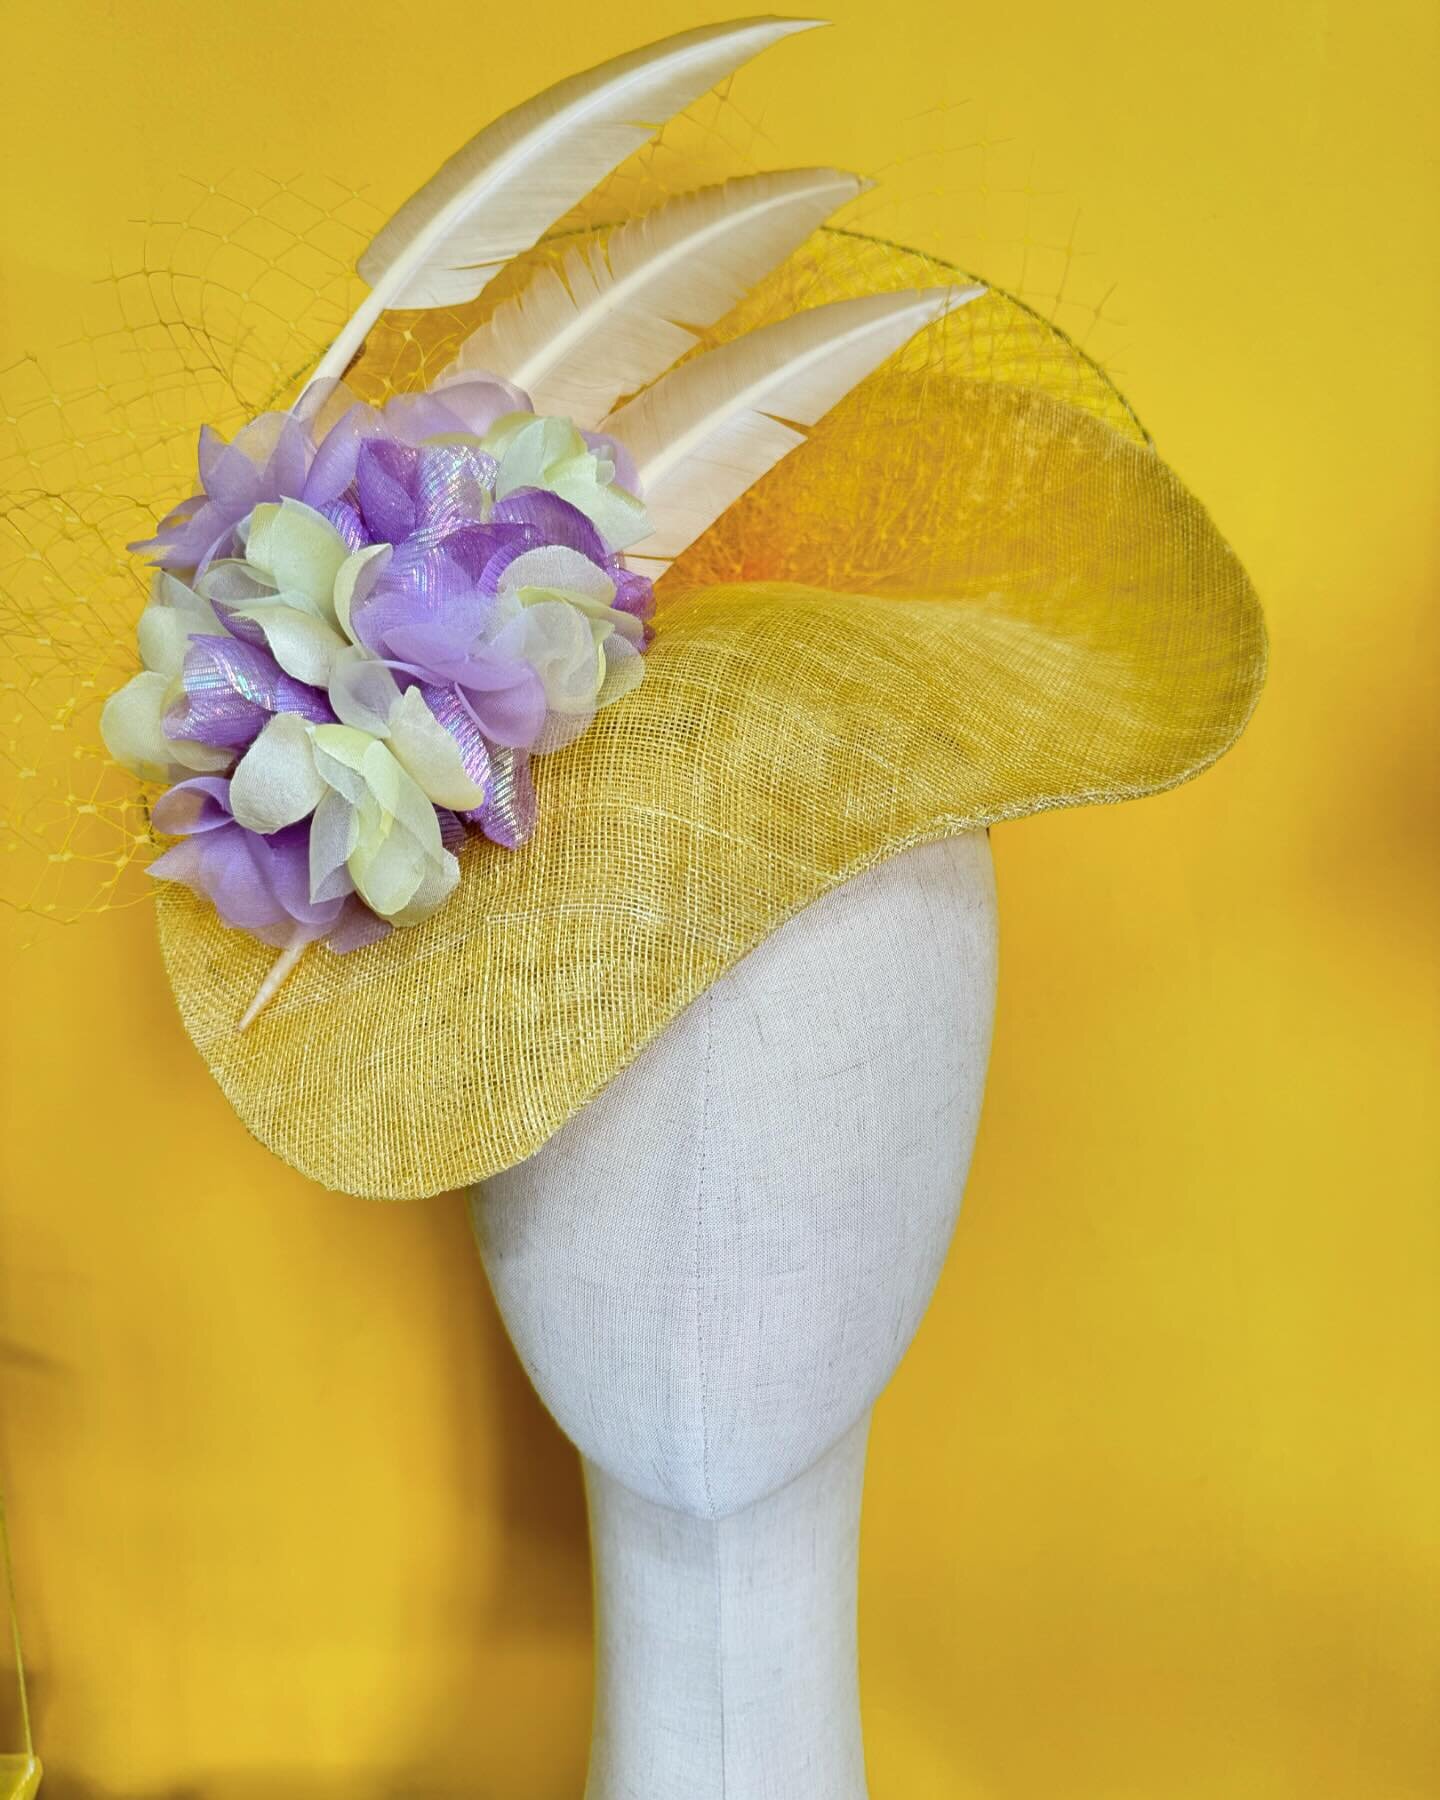 Have you buy your tickets?  We are looking to seeing in our first Kentucky derby party. Click the bio link for more info.
.
.
.
#kmhats #kentuckyderby #karenmorrismillinery #kentuckderbyparty #millinerycouture #derbyfashion #party #raffle #thisoldhor